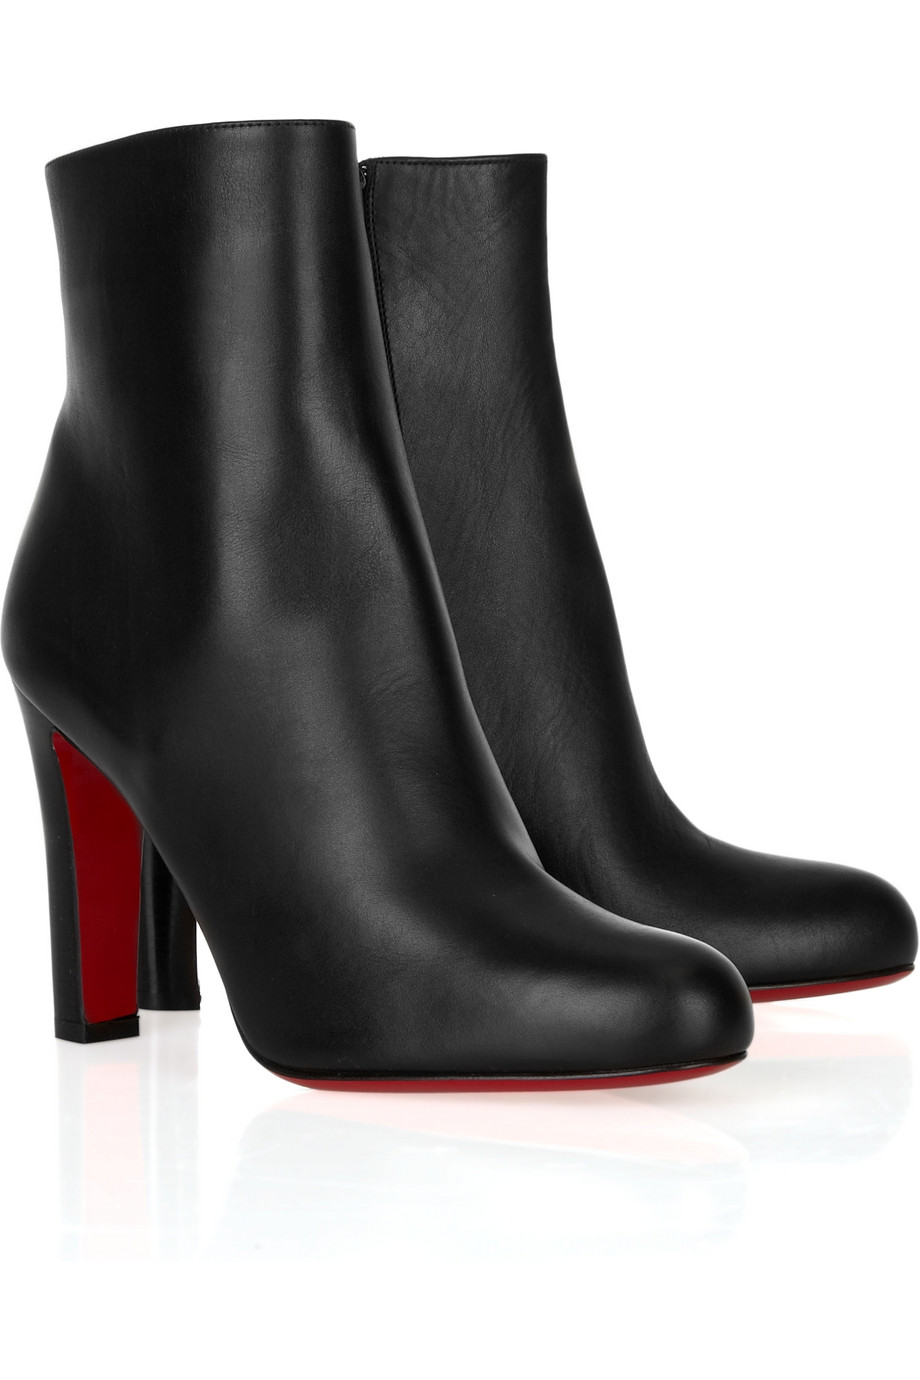 Christian Louboutin Adox 85 Leather Booties in Black | Lyst